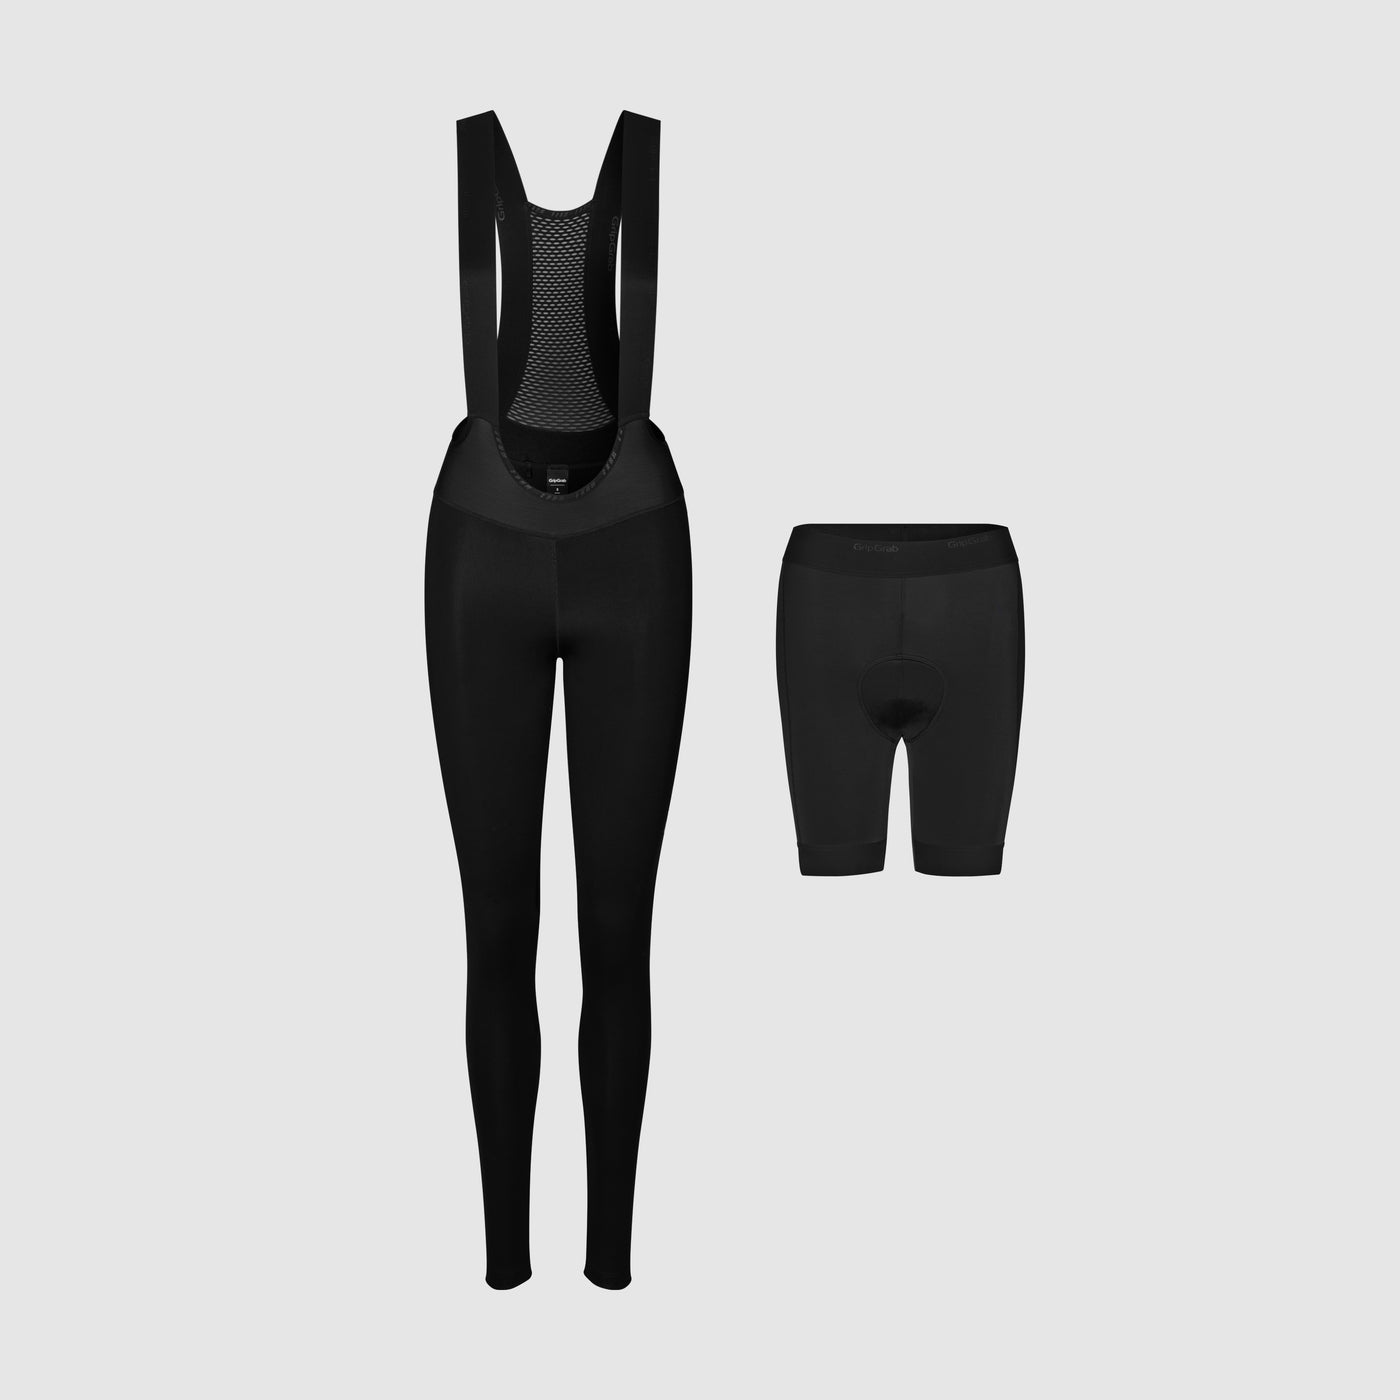 Women’s ThermaShell Water-Resistant Bib Tights